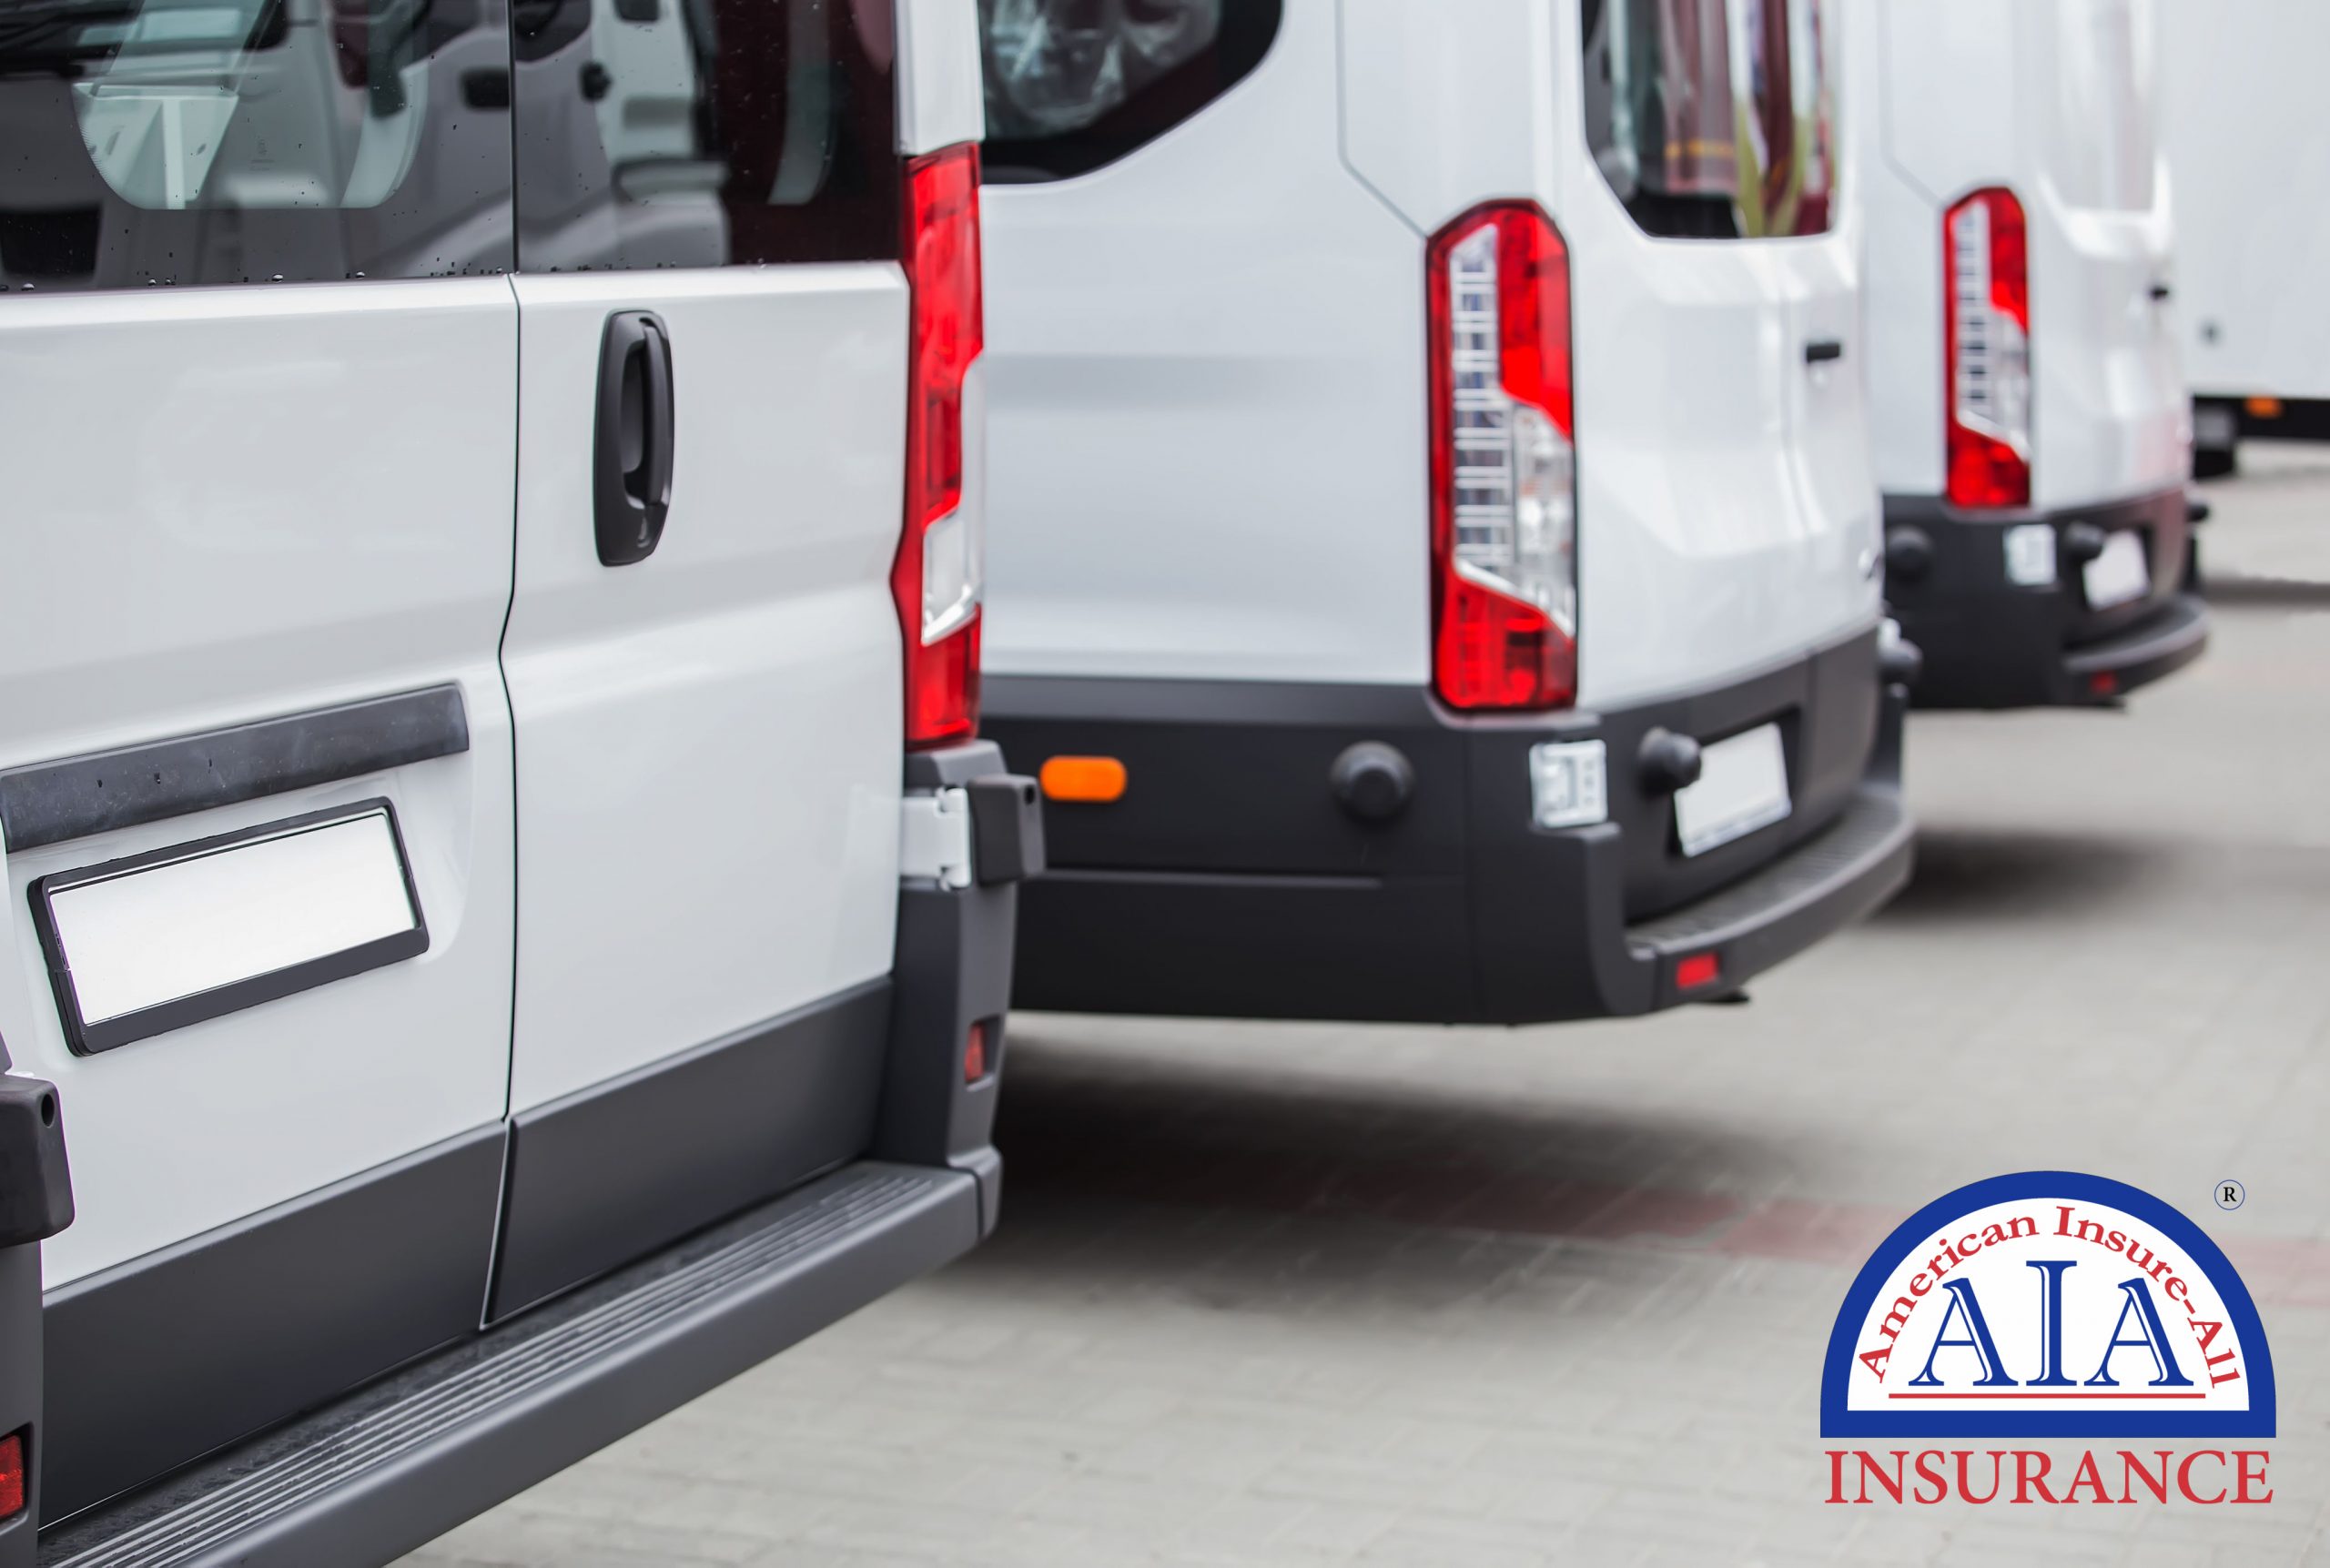 Where Does Commercial Auto Insurance Come into the Security of Your Business?